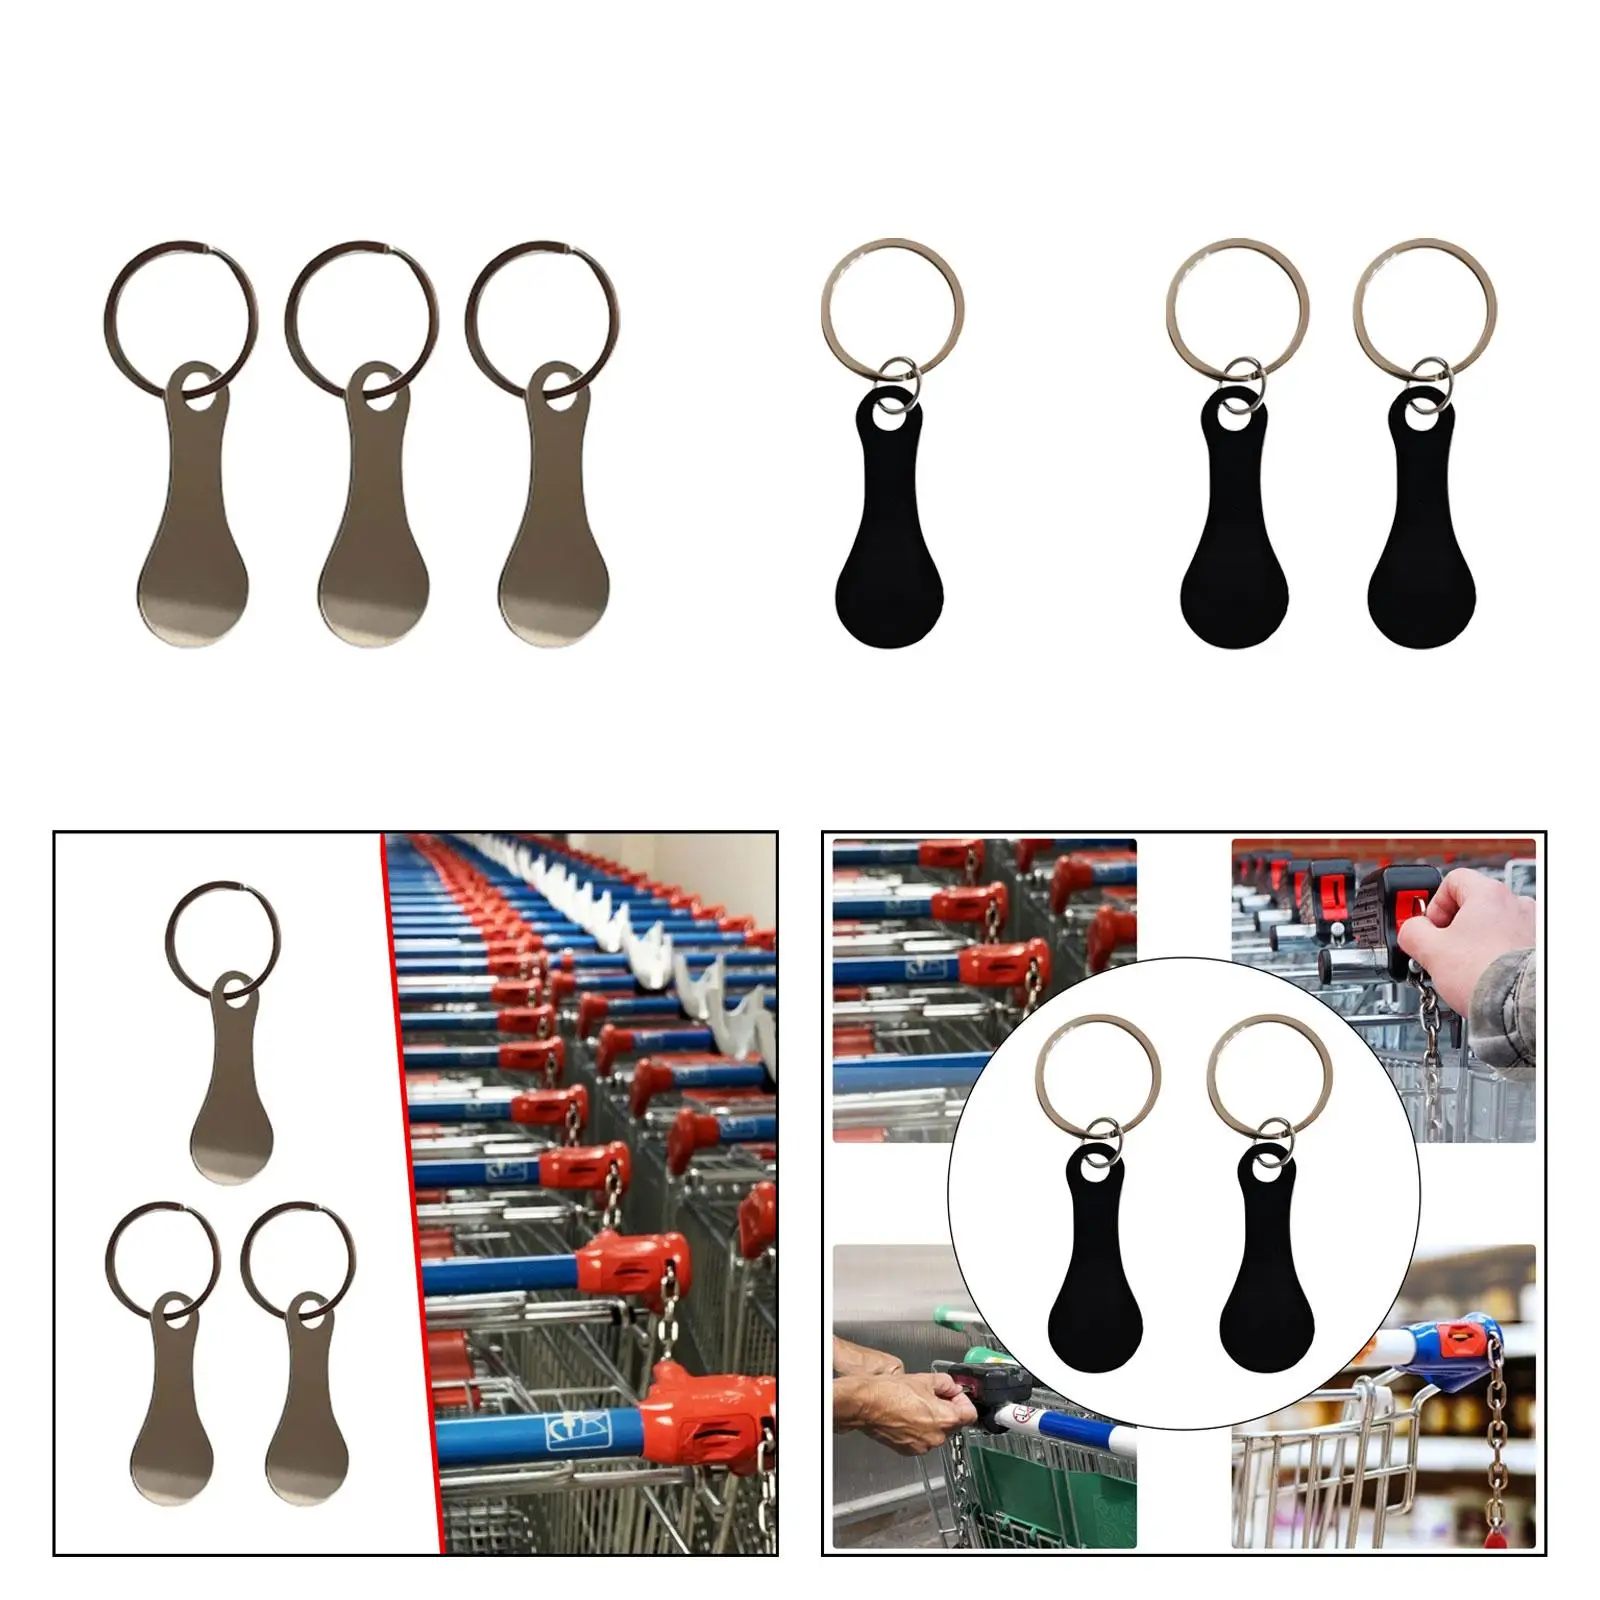 Shopping Trolley Tokens Shopping Trolley Removers Removable Necklace Dangle Decorative Metal Release Keys Coin Holder Keychains